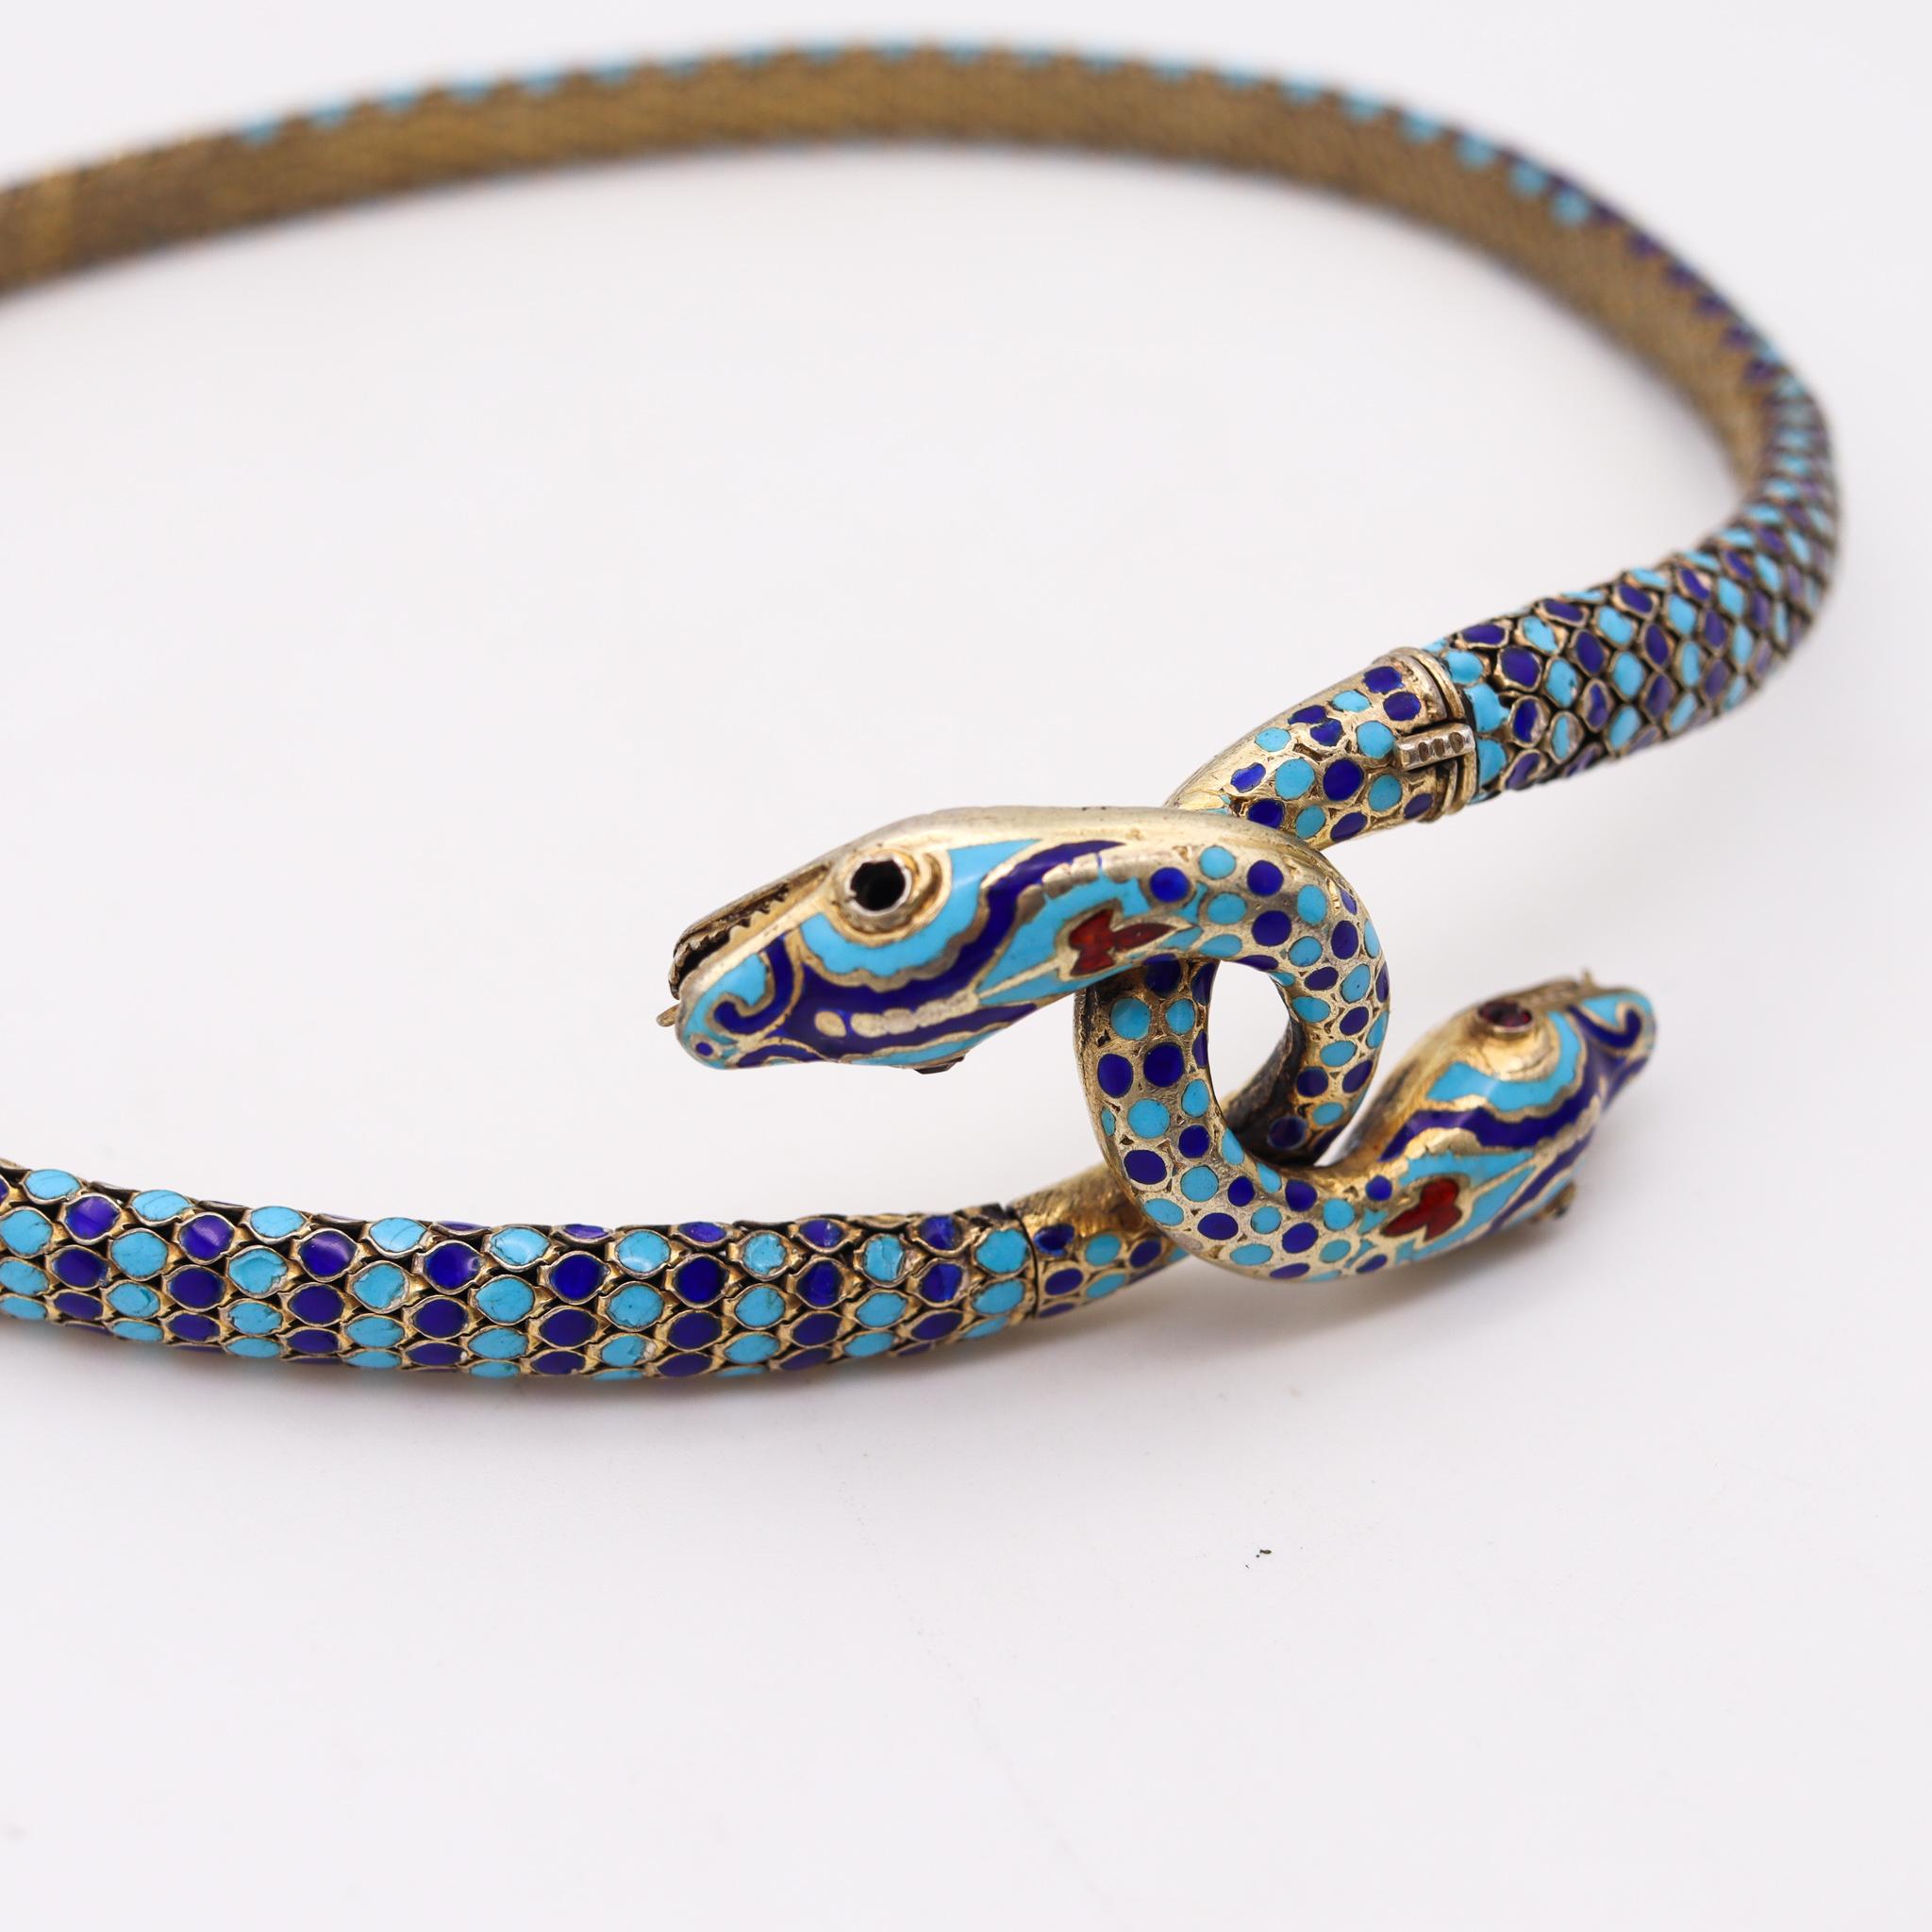 French 1880 Egyptian Revival Snakes Necklace in Silver with Champleve Cloisonné In Excellent Condition For Sale In Miami, FL